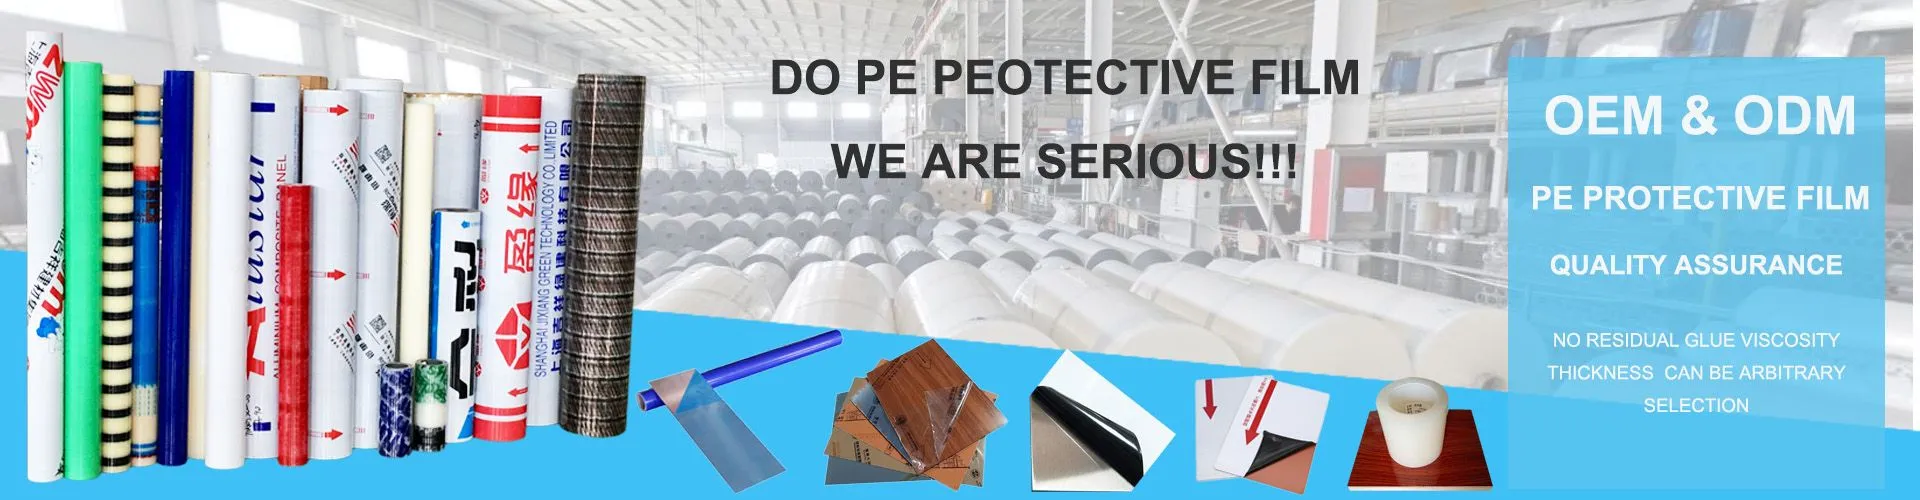 What are the requirements for use and procurement of PE protective film